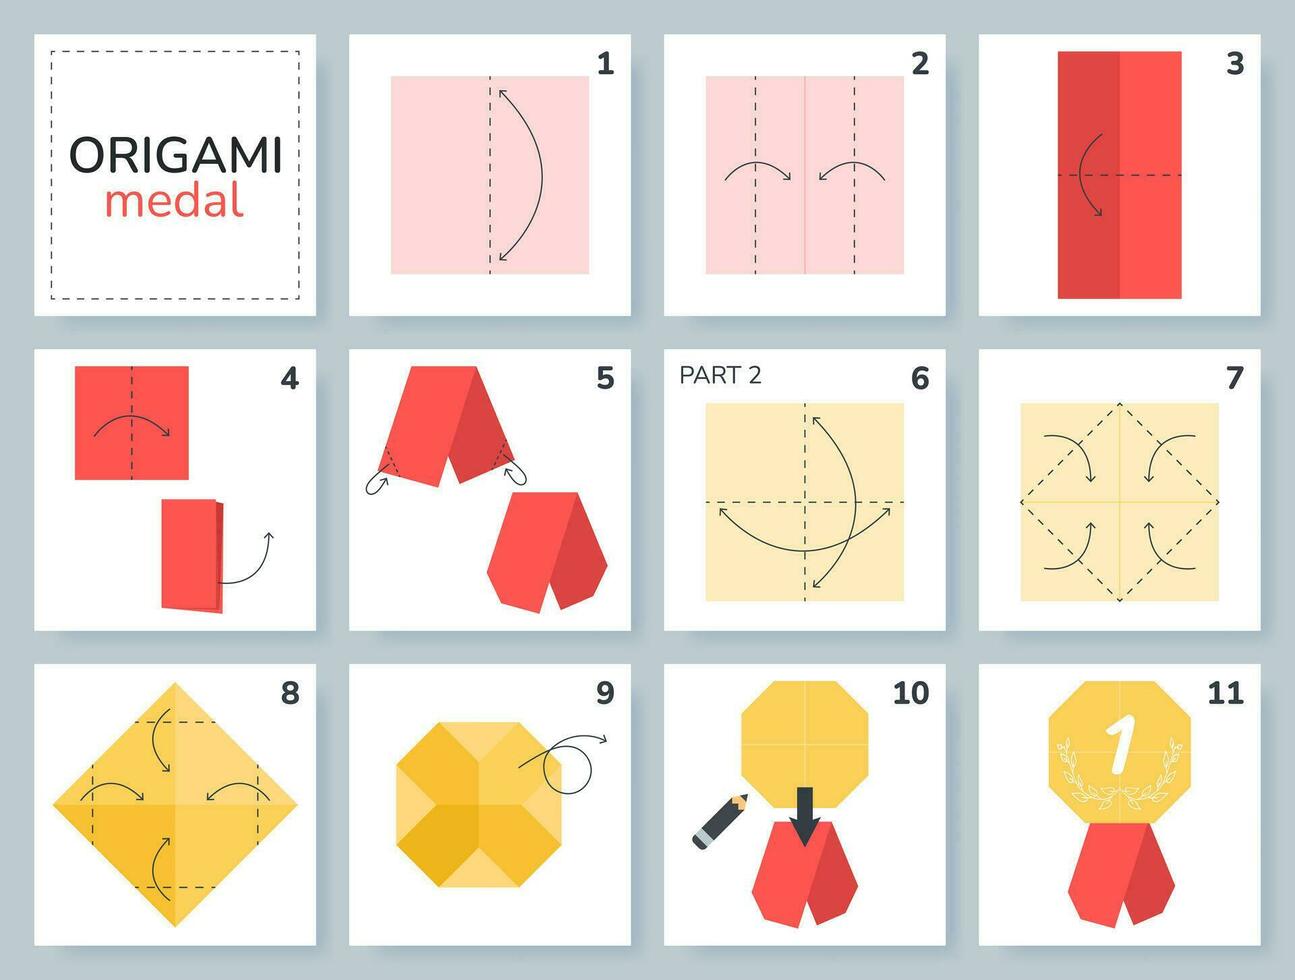 Medal origami scheme tutorial moving model. Origami for kids. Step by step how to make a cute origami medal. Vector illustration.